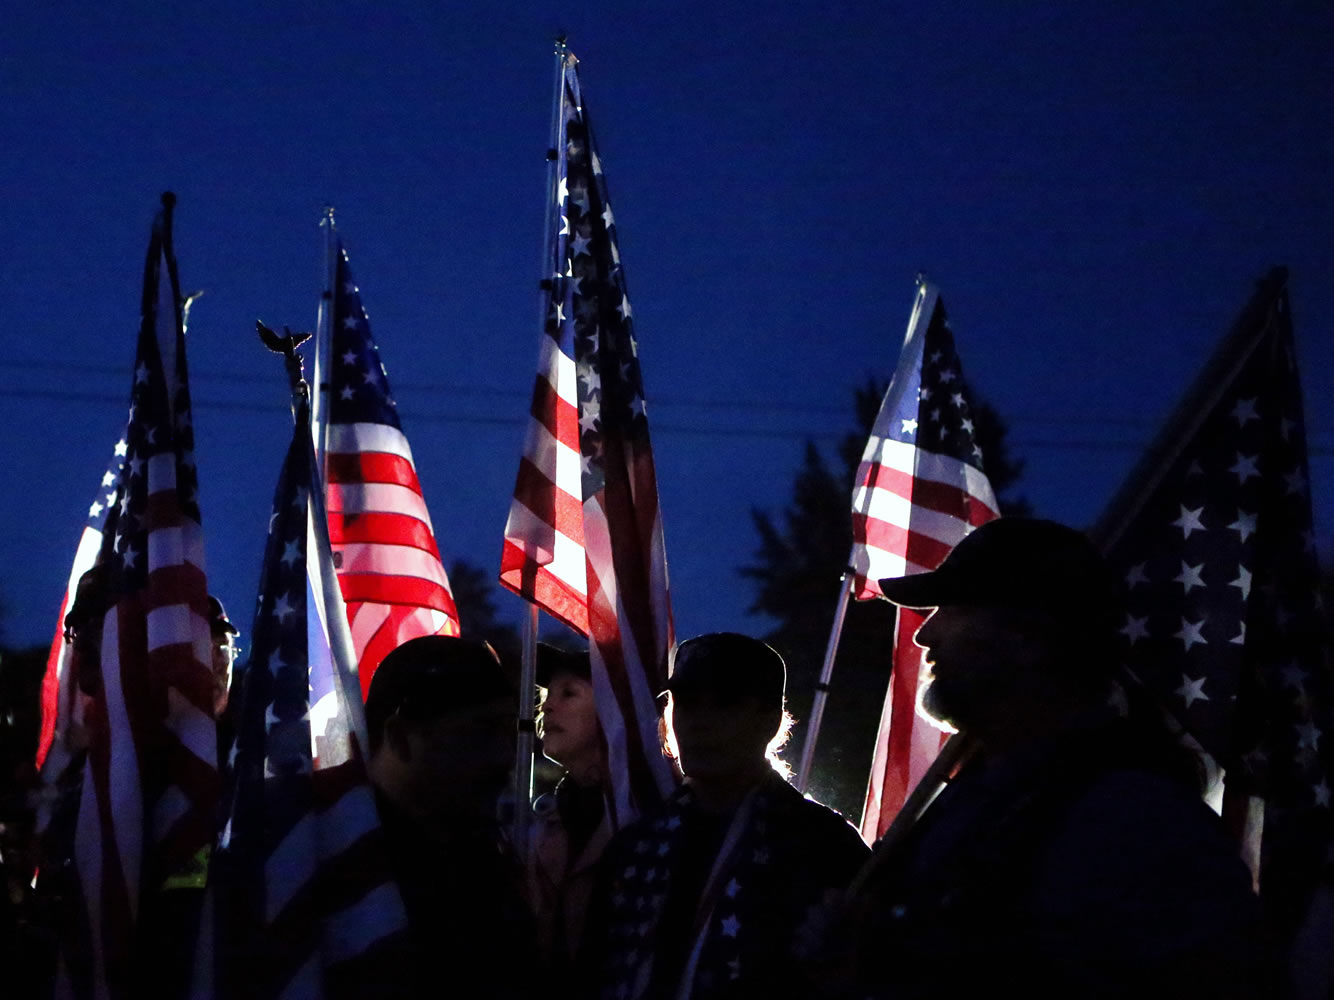 Members of the Patriot Guard file into a candlelight vigil outside Sparks Middle School in Sparks, Nev., on Wednesday.